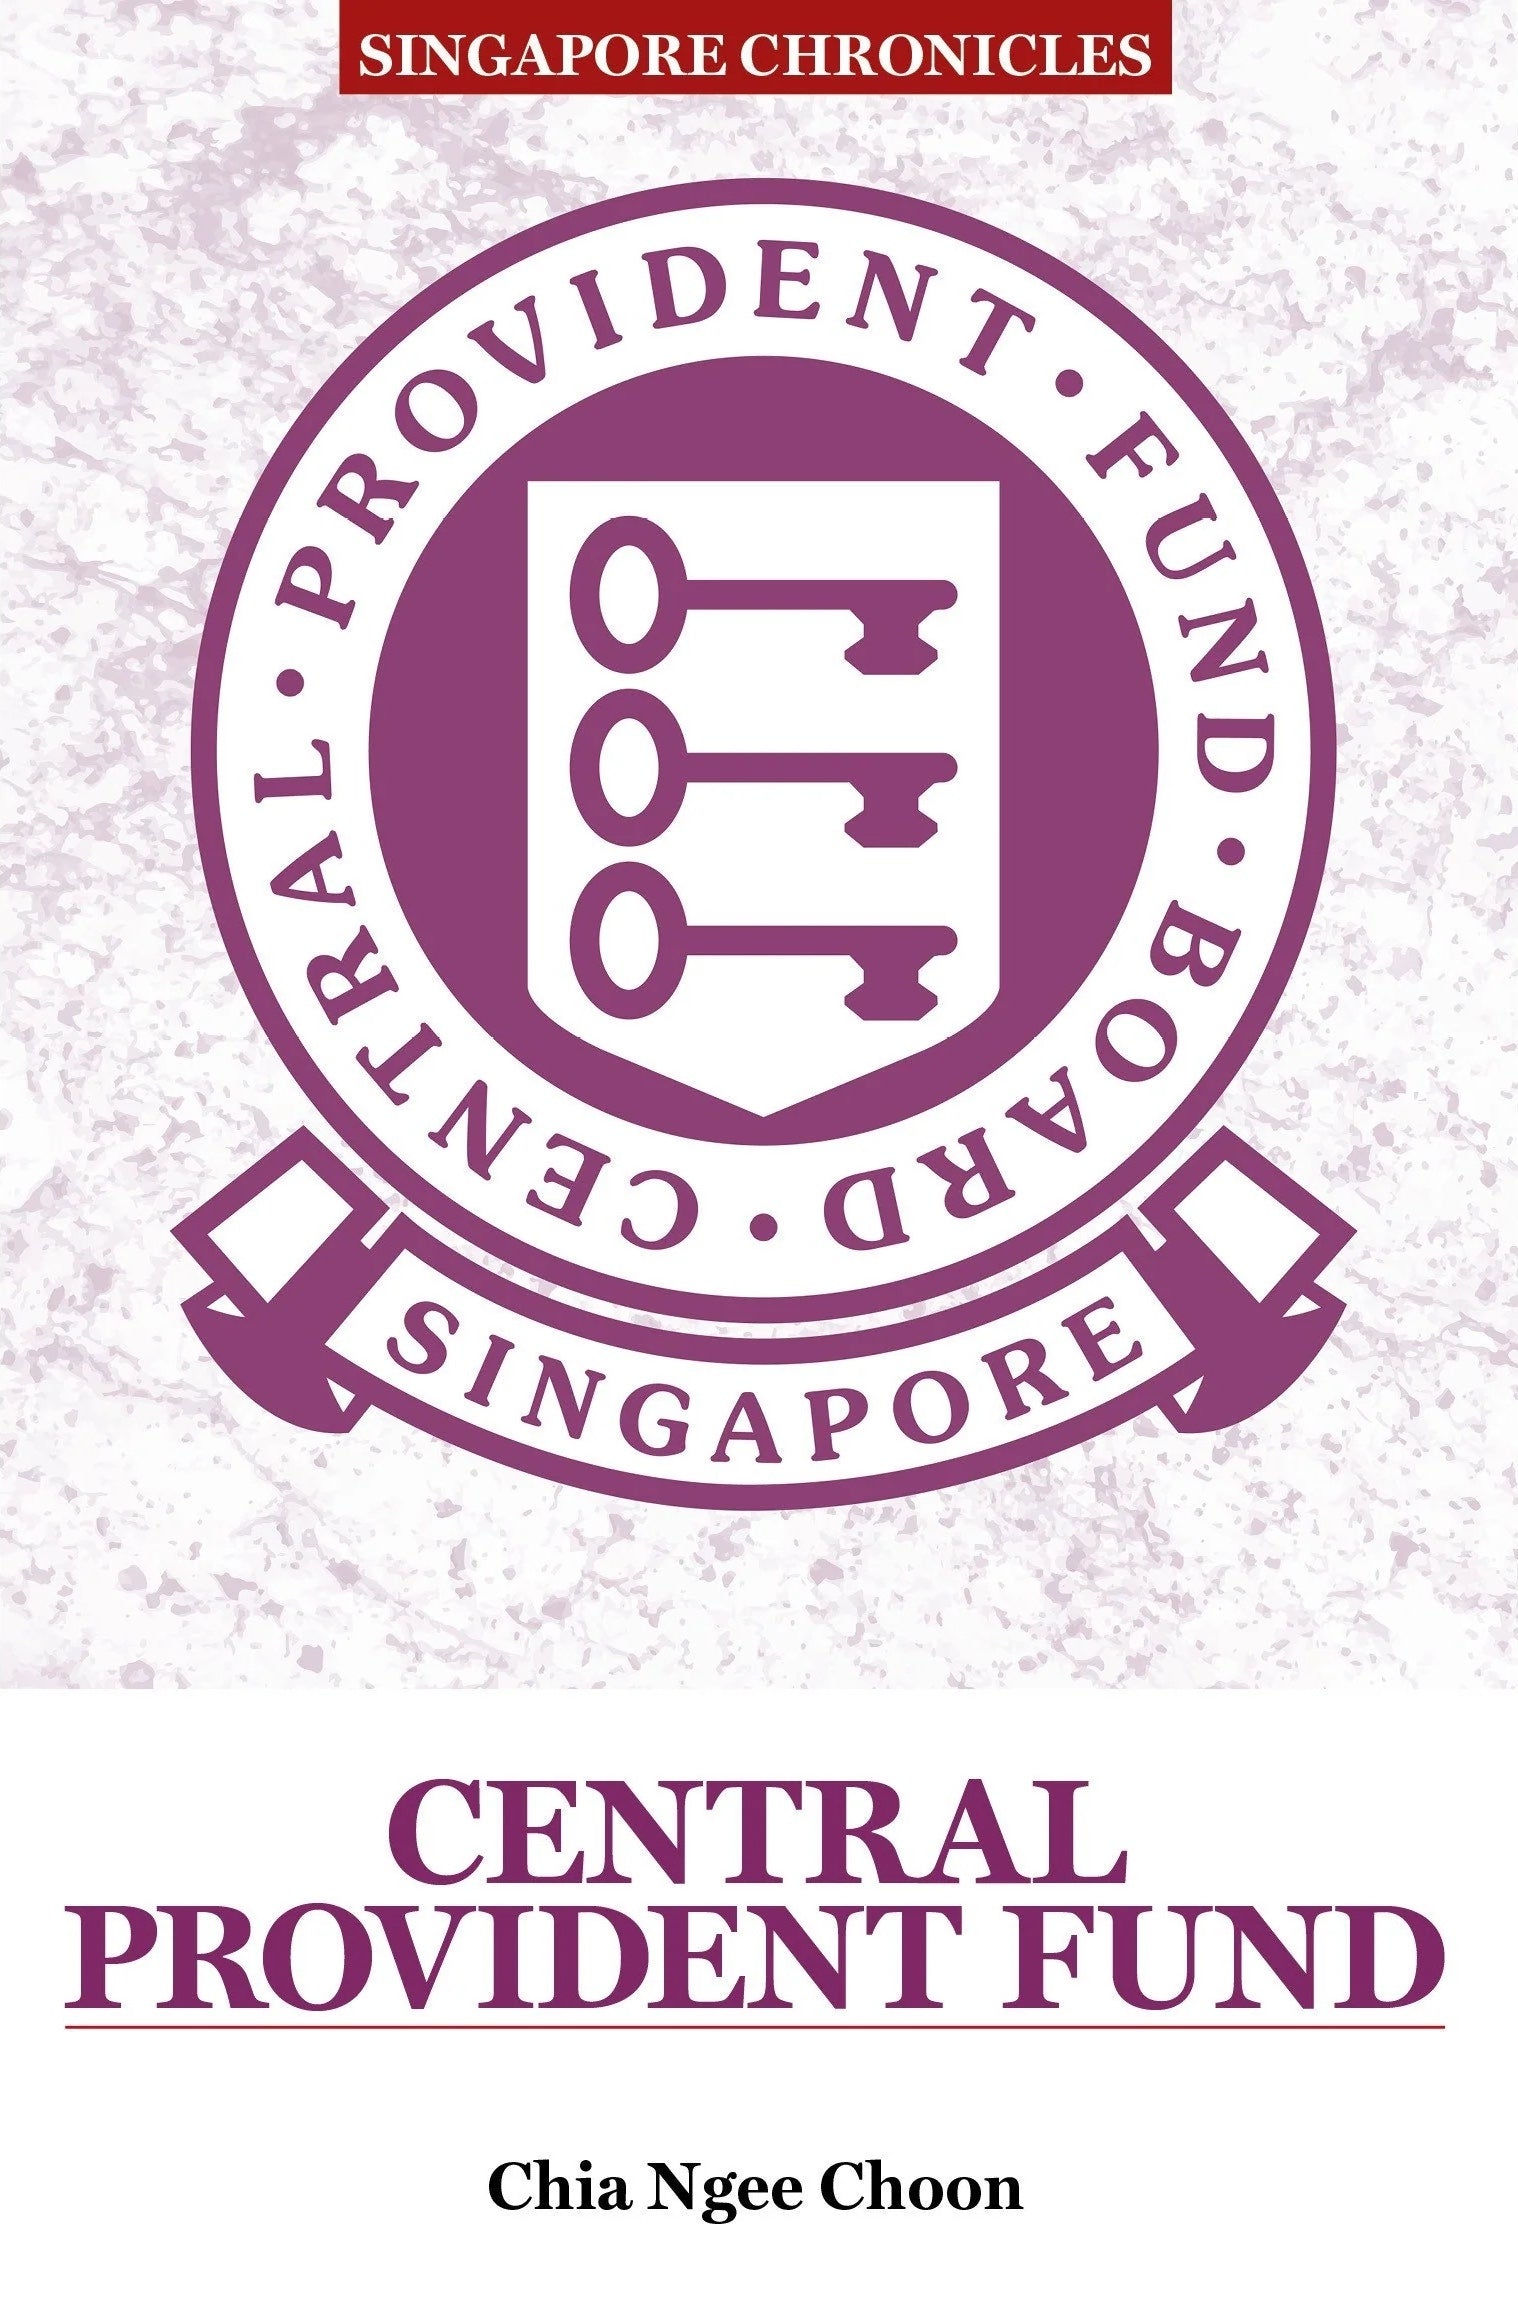 Singapore Chronicles: Central Provident Fund (CPF)